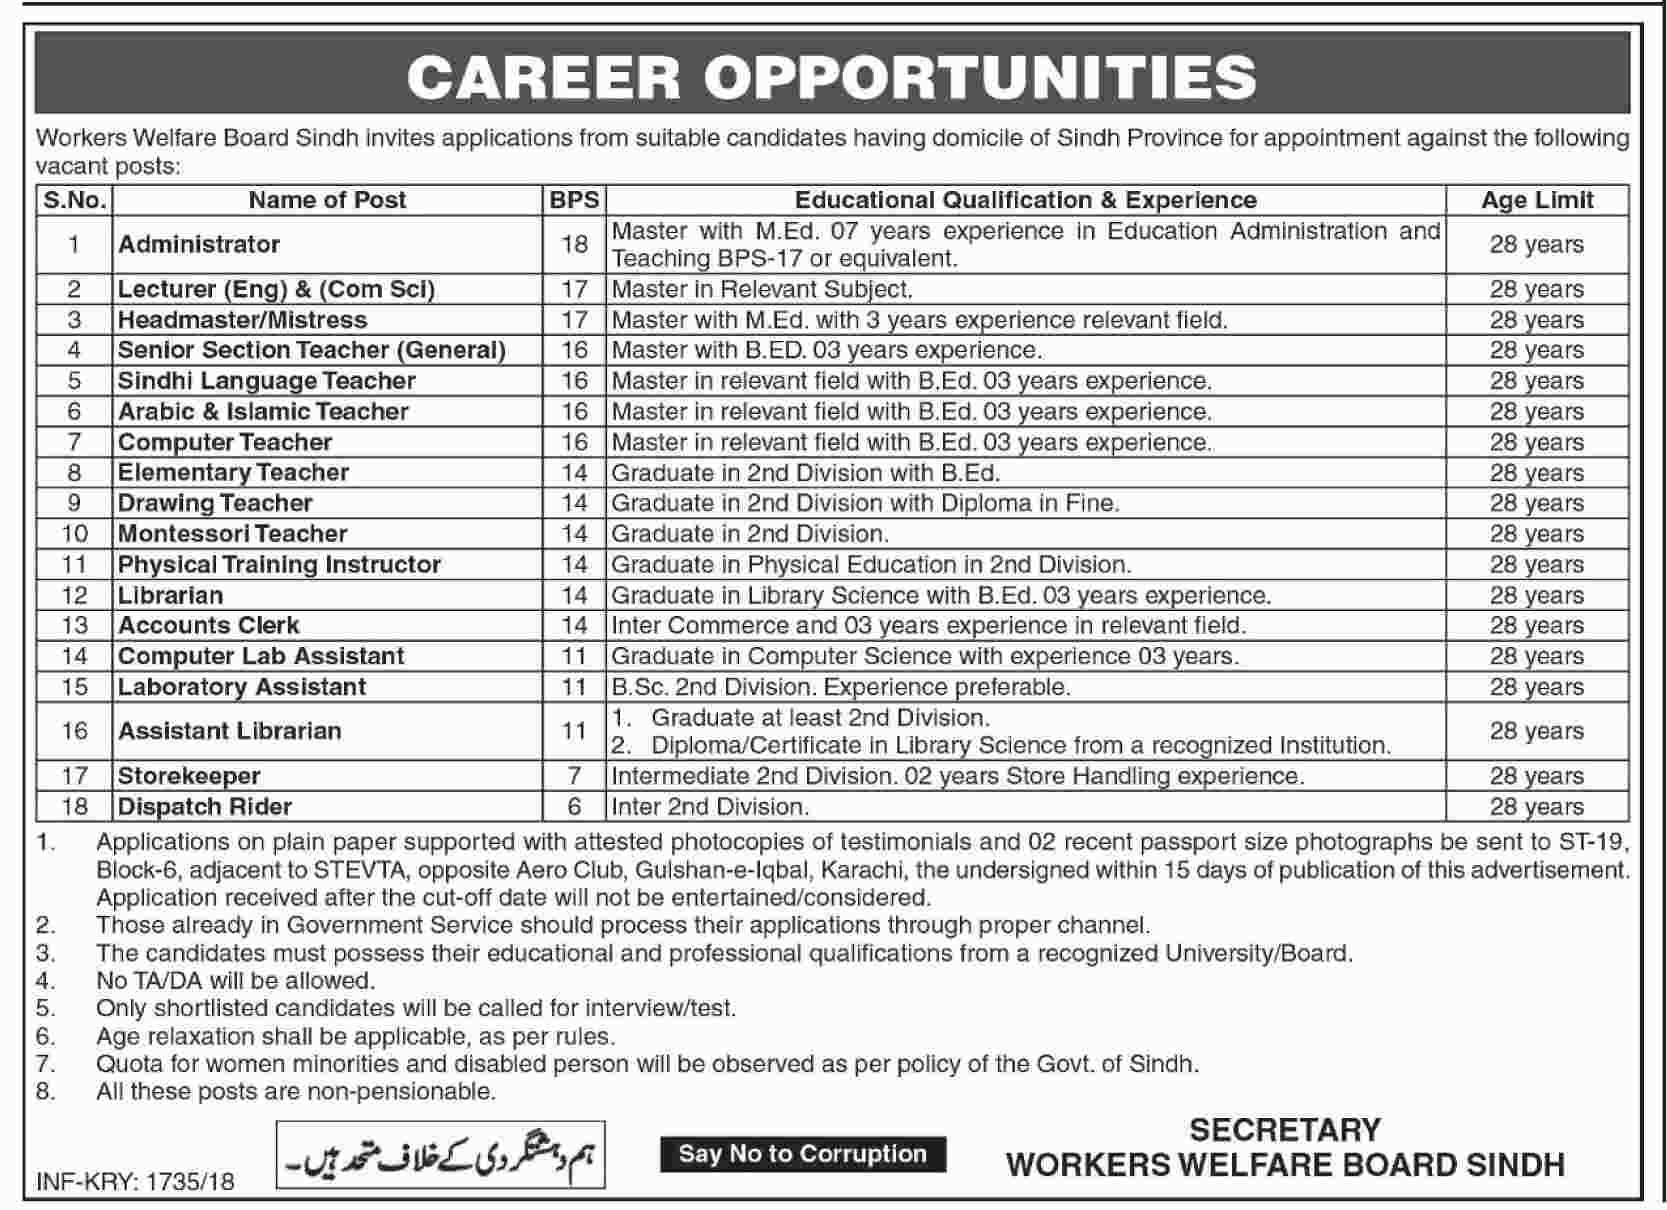 Workers Welfare Board Sindh (WWBS) Jobs 2018 for 20+ Admin, Accounts Clerk, Library, Teachers and Support Staff Latest Advertisement